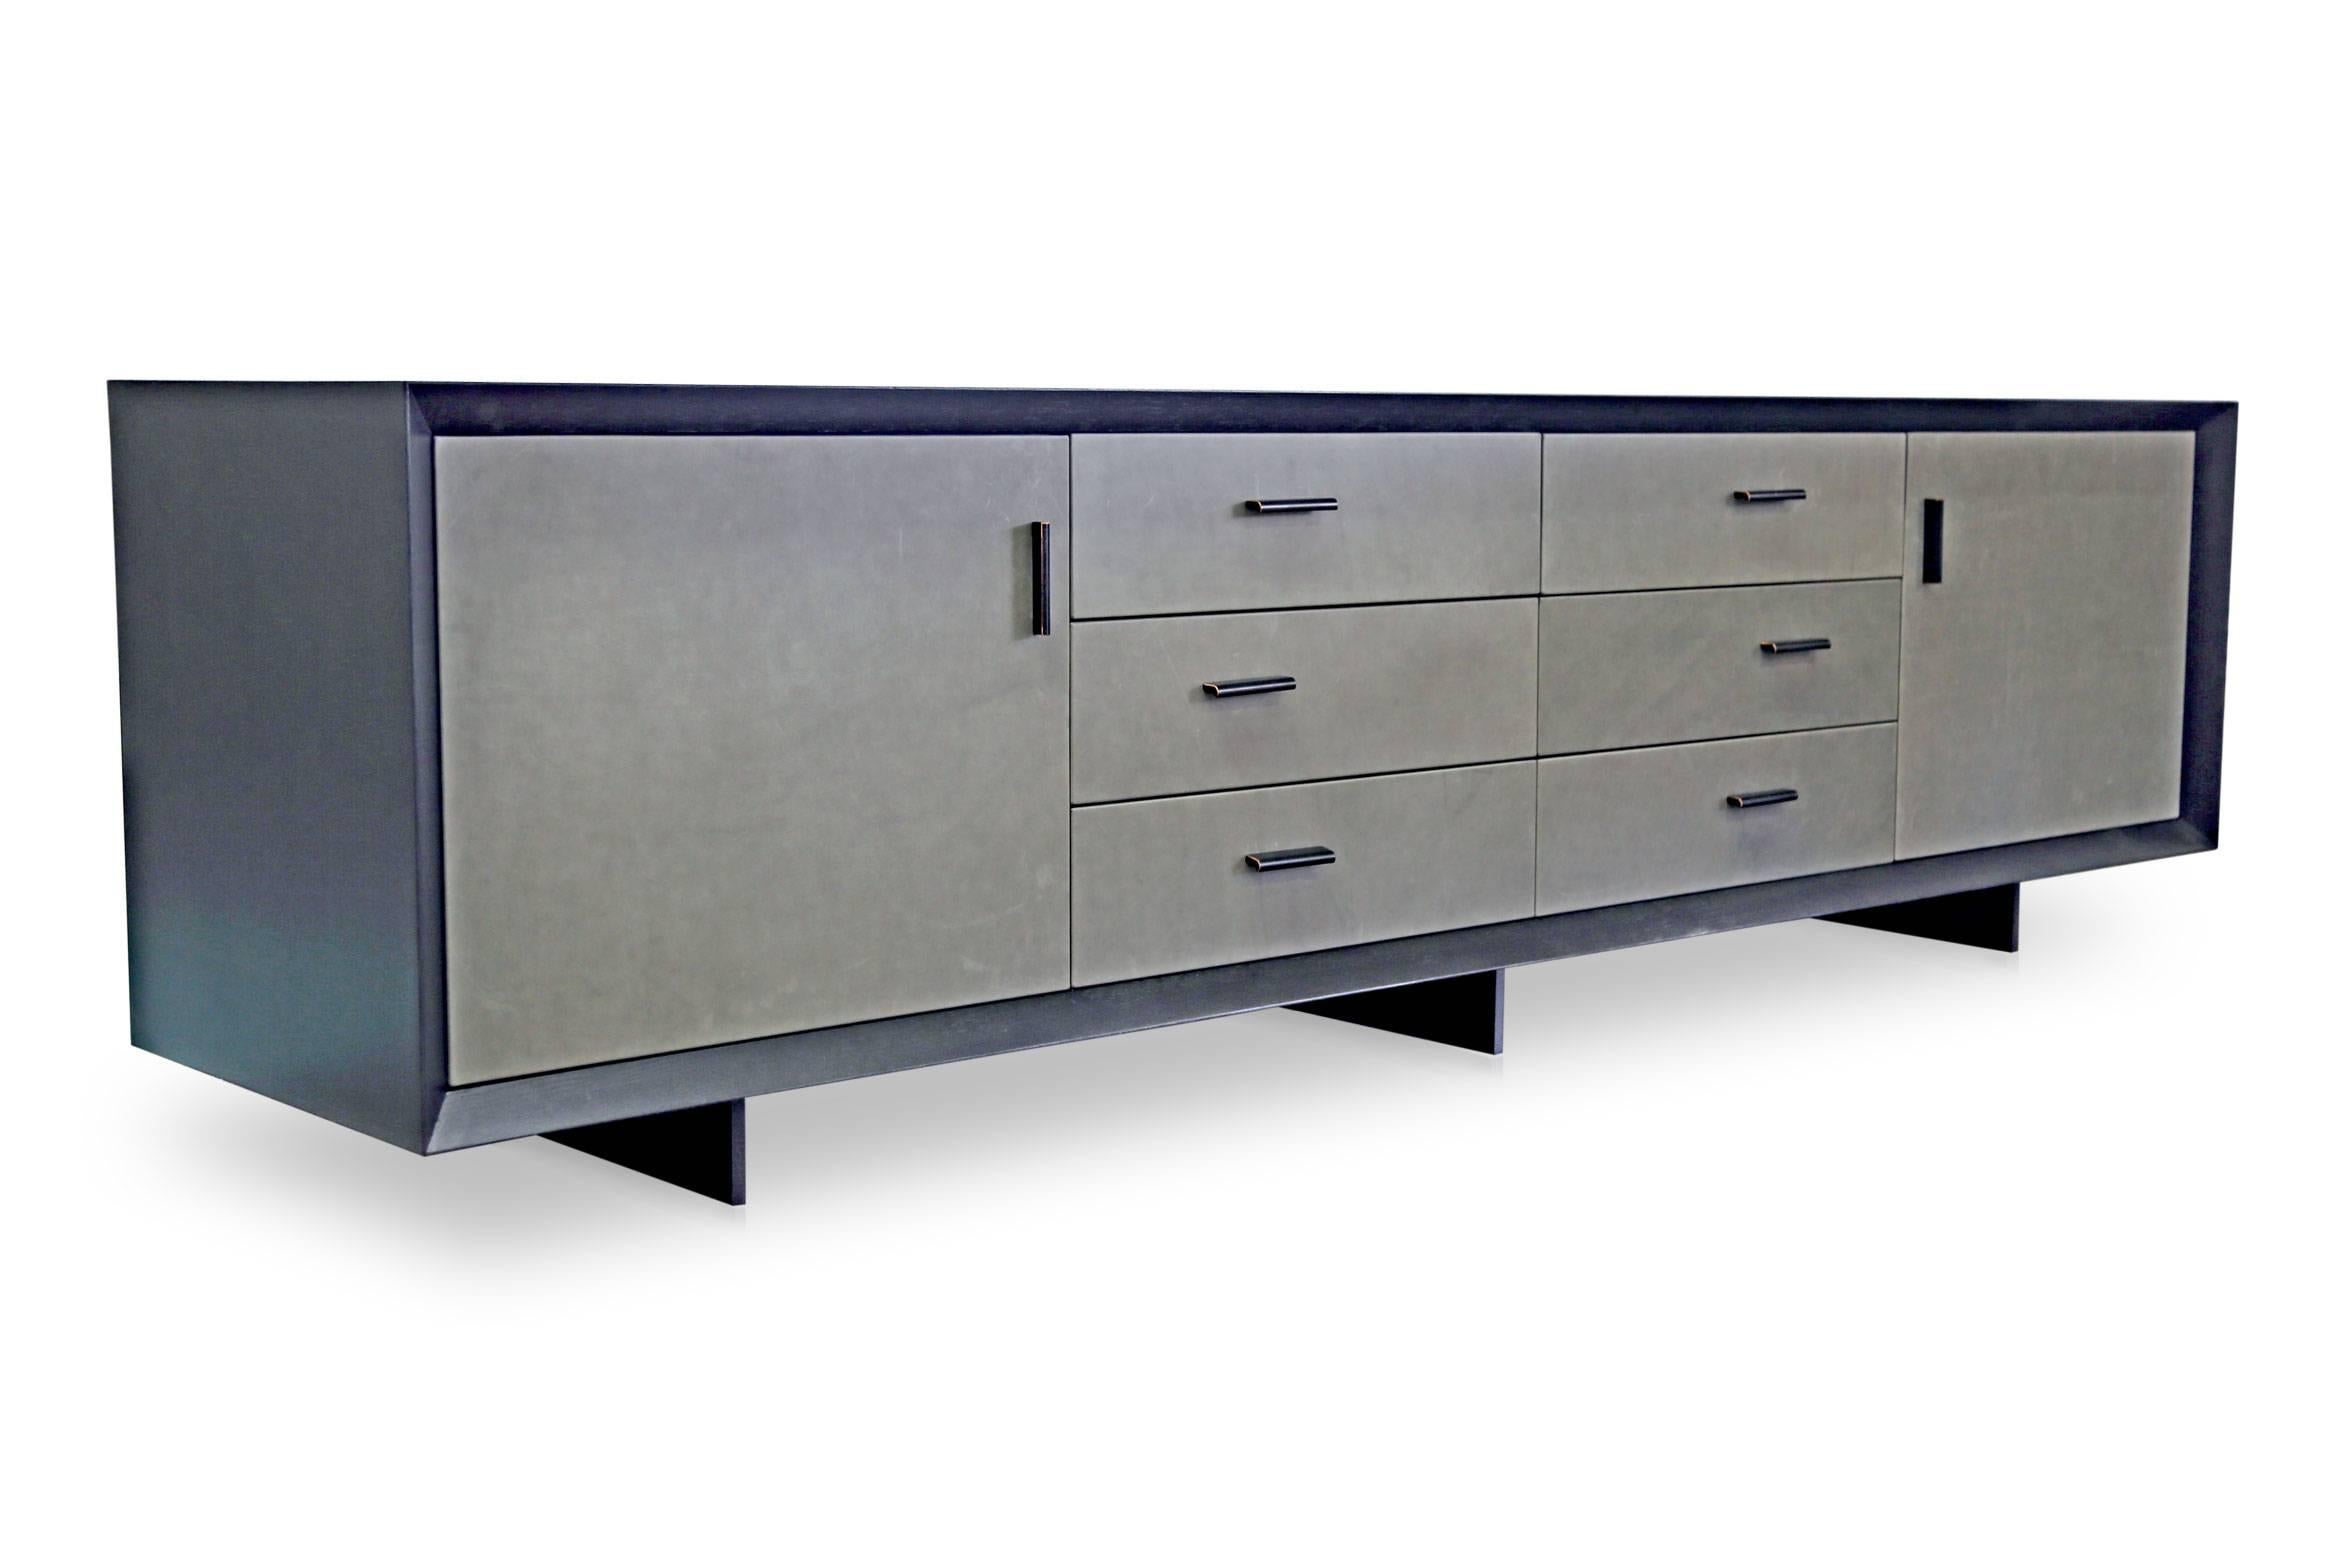 The Sentient Murlough dresser is a refined storage piece in sleek, muted tones of black and grey. Each dresser is handmade to order in Brooklyn. The ebonized cabinet accentuates natural wood grains, and juxtaposed with the supple leather that wraps